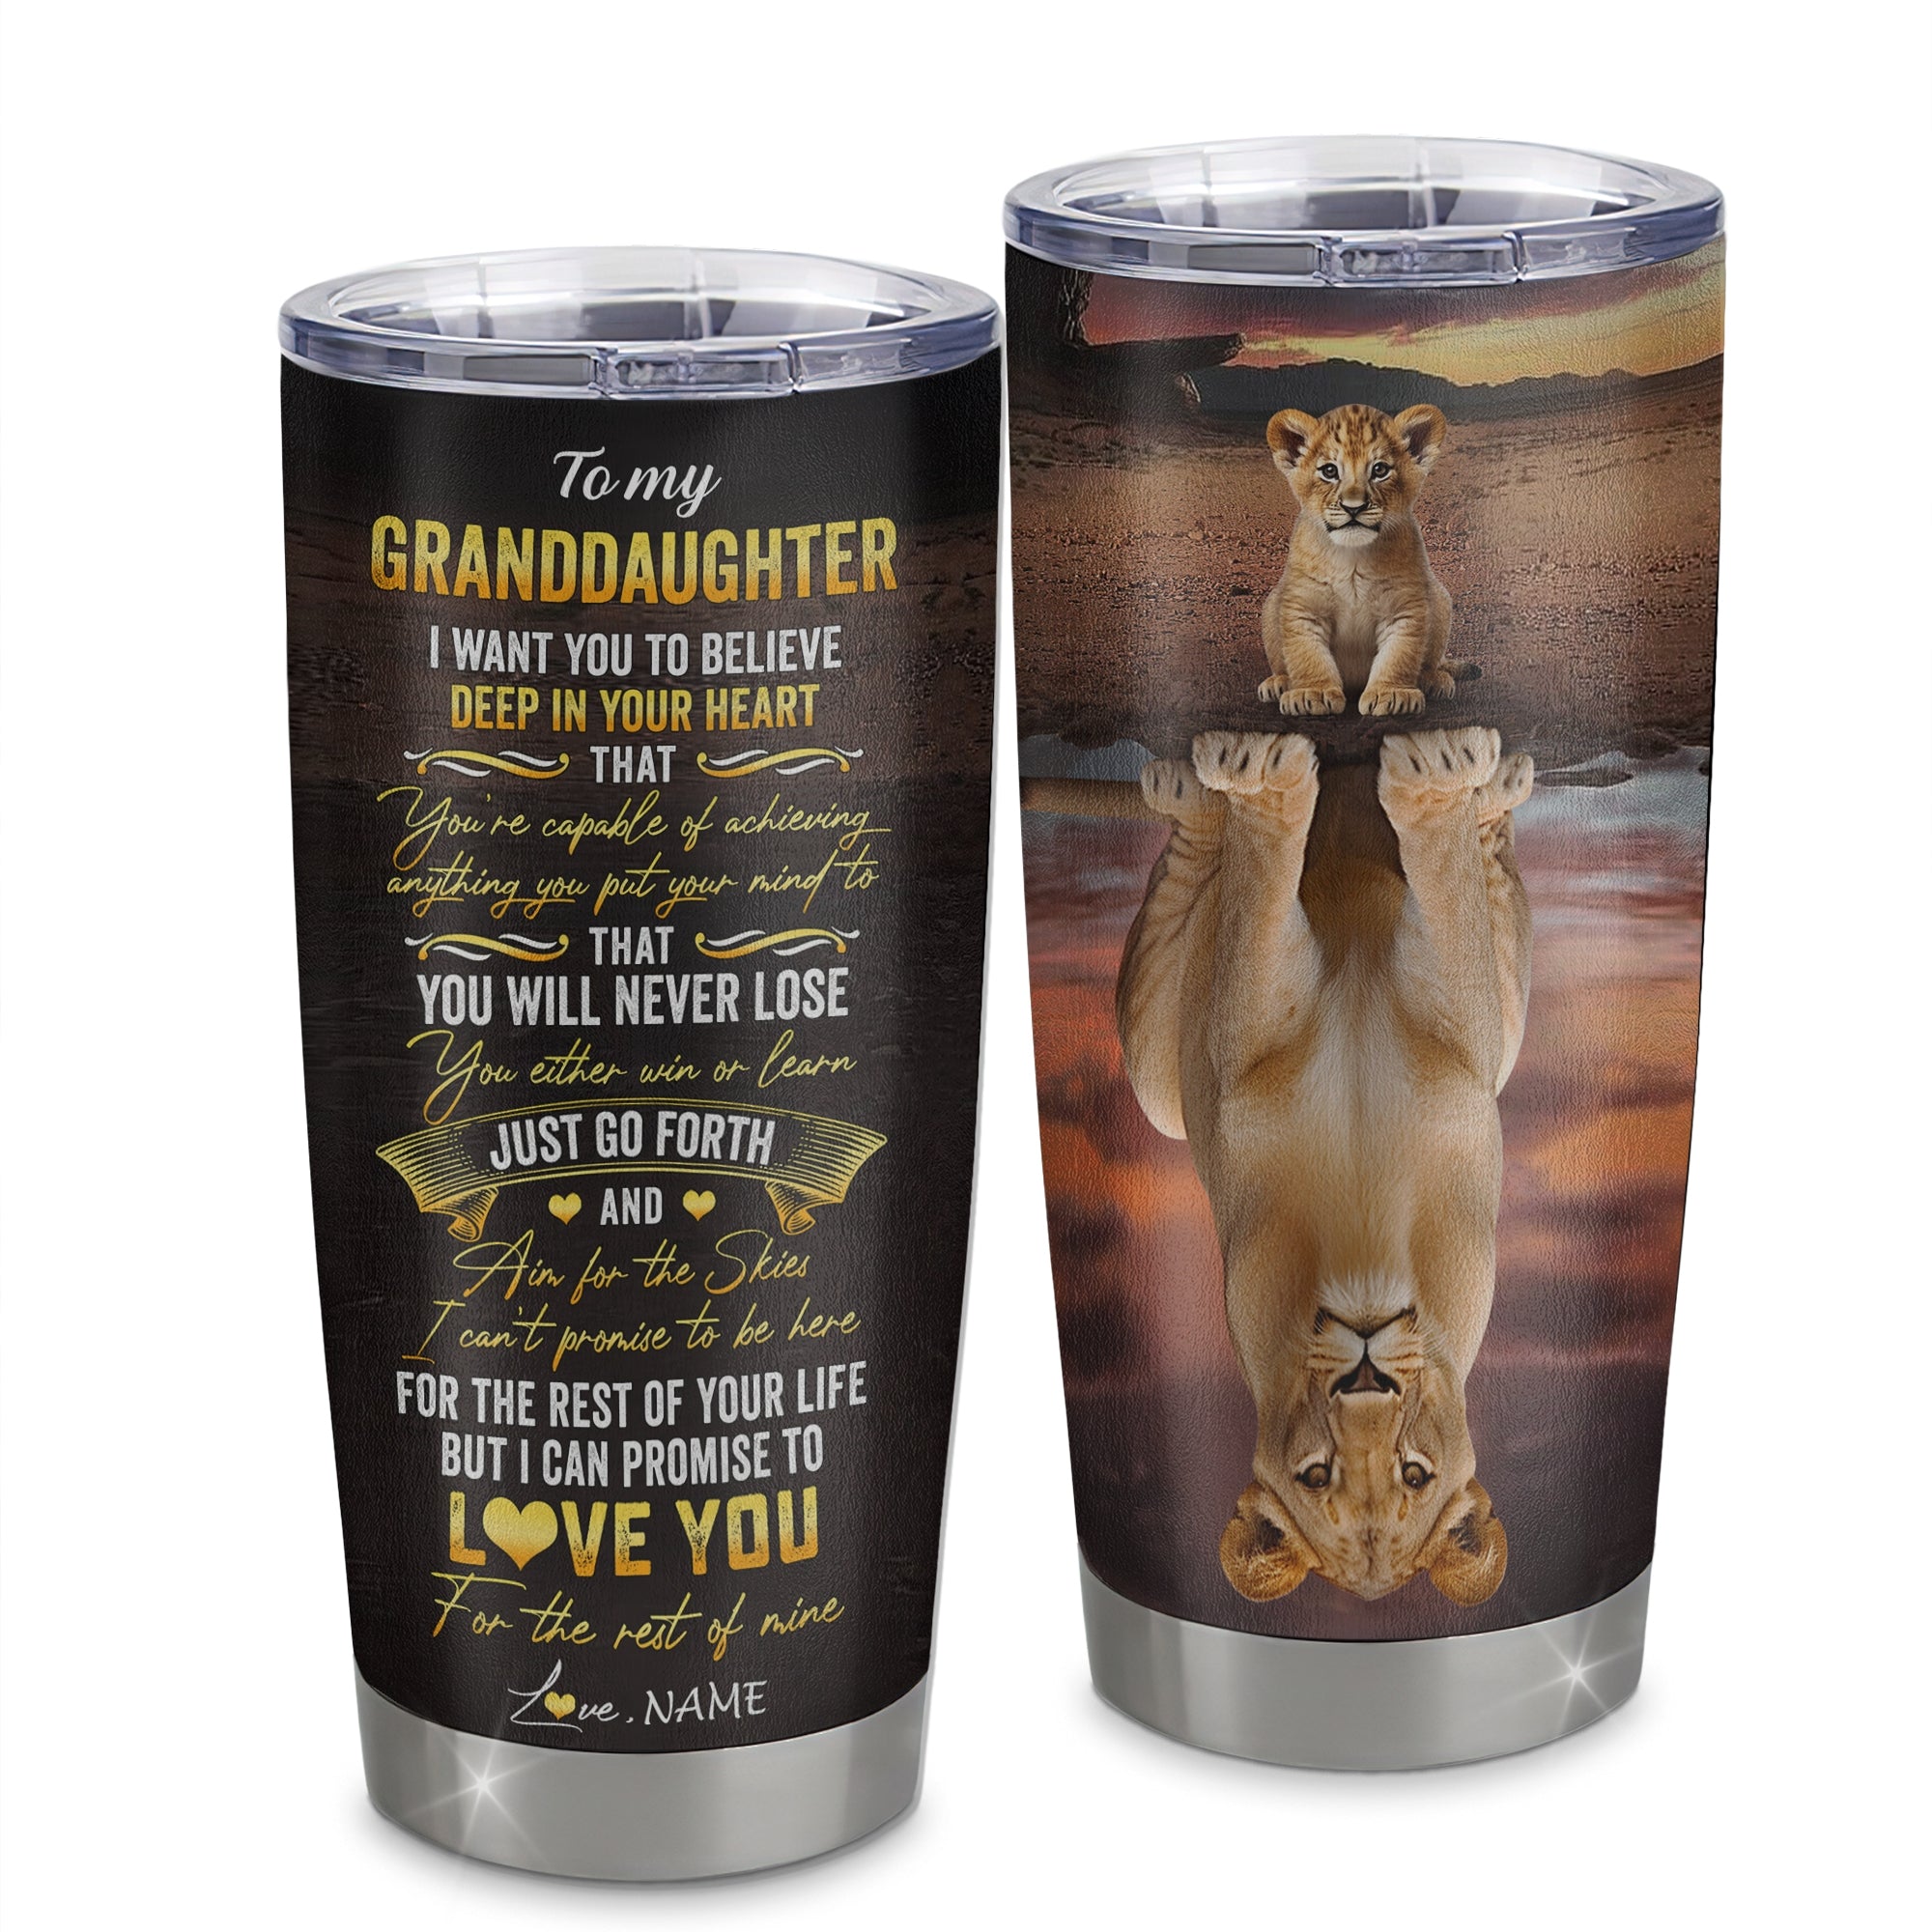 Personalized_To_My_Granddaughter_Tumbler_From_Grandma_Grandpa_Stainless_Steel_Cup_Believe_Deep_In_Your_Heart_Lion_Granddaughter_Birthday_Christmas_Travel_Mug_Tumbler_mockup_1-1.jpg